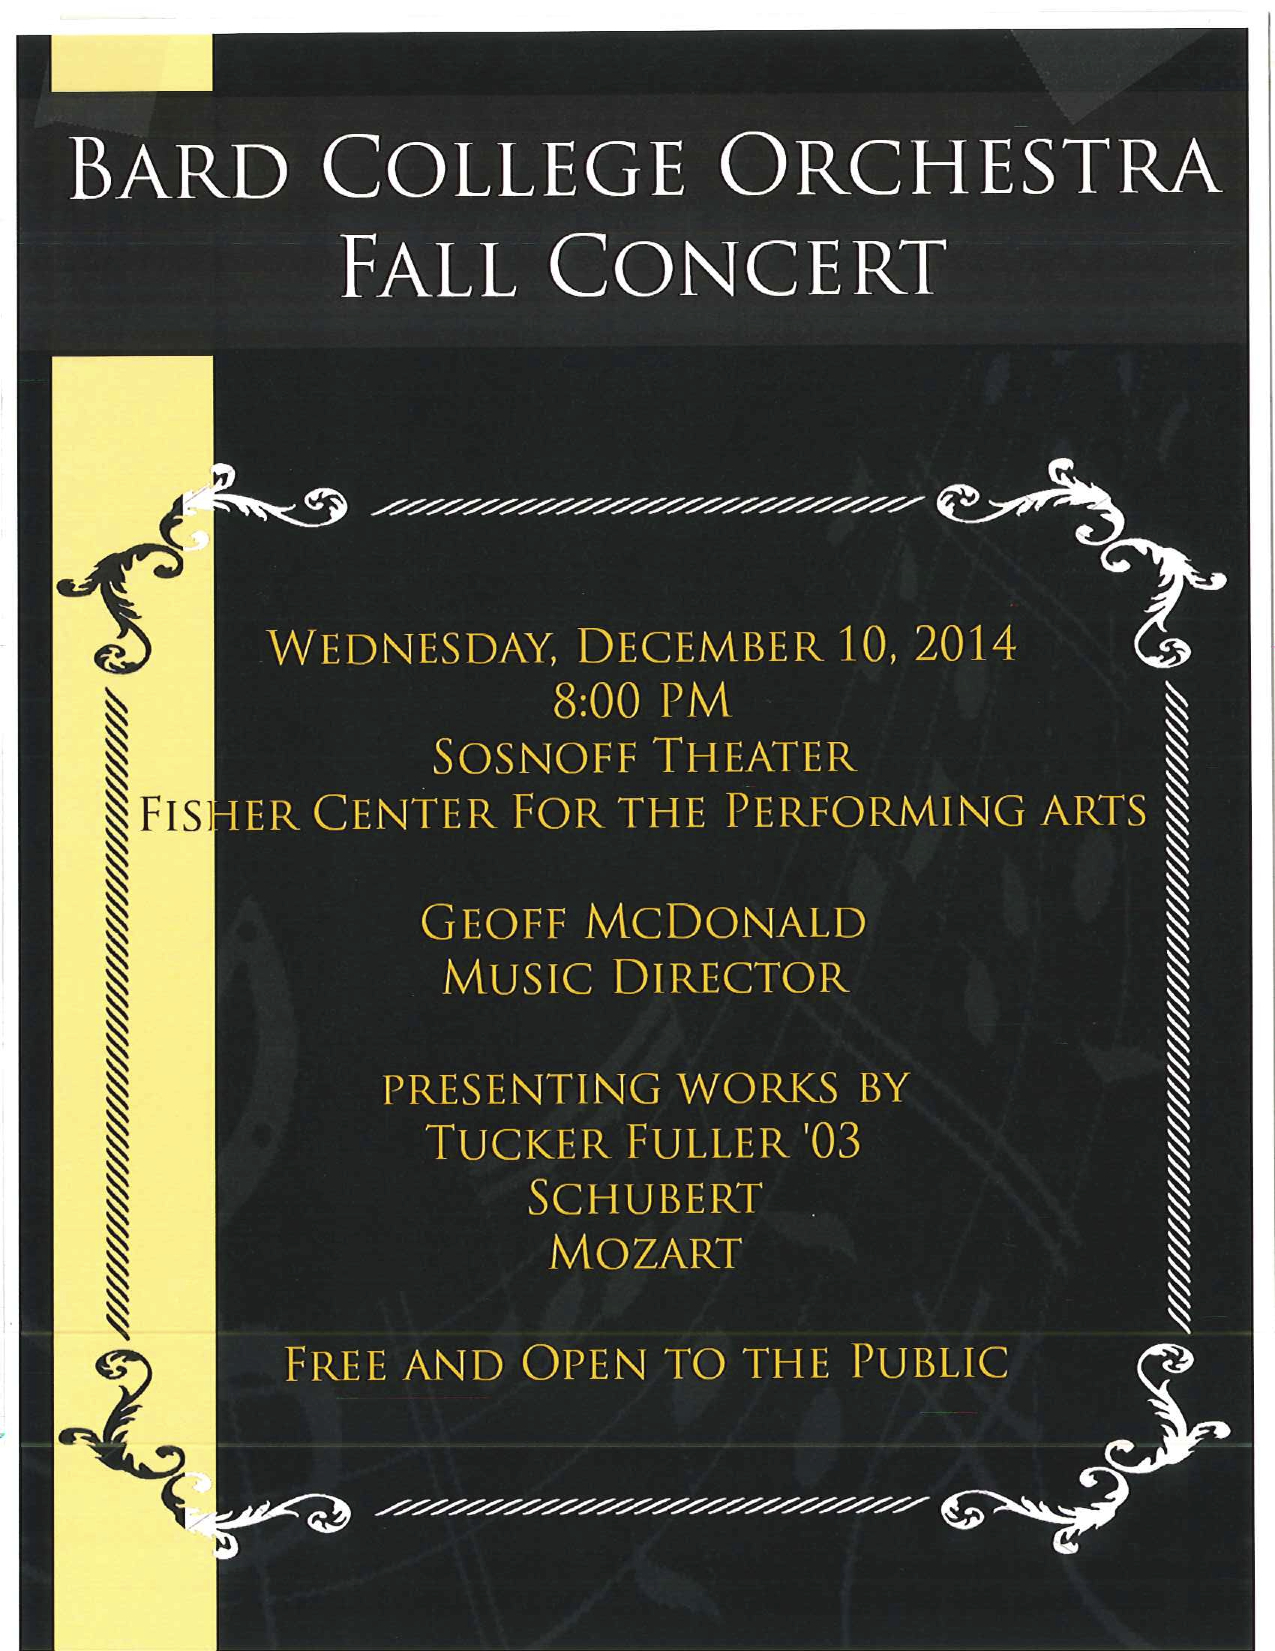 Bard College Orchestra Fall Concert